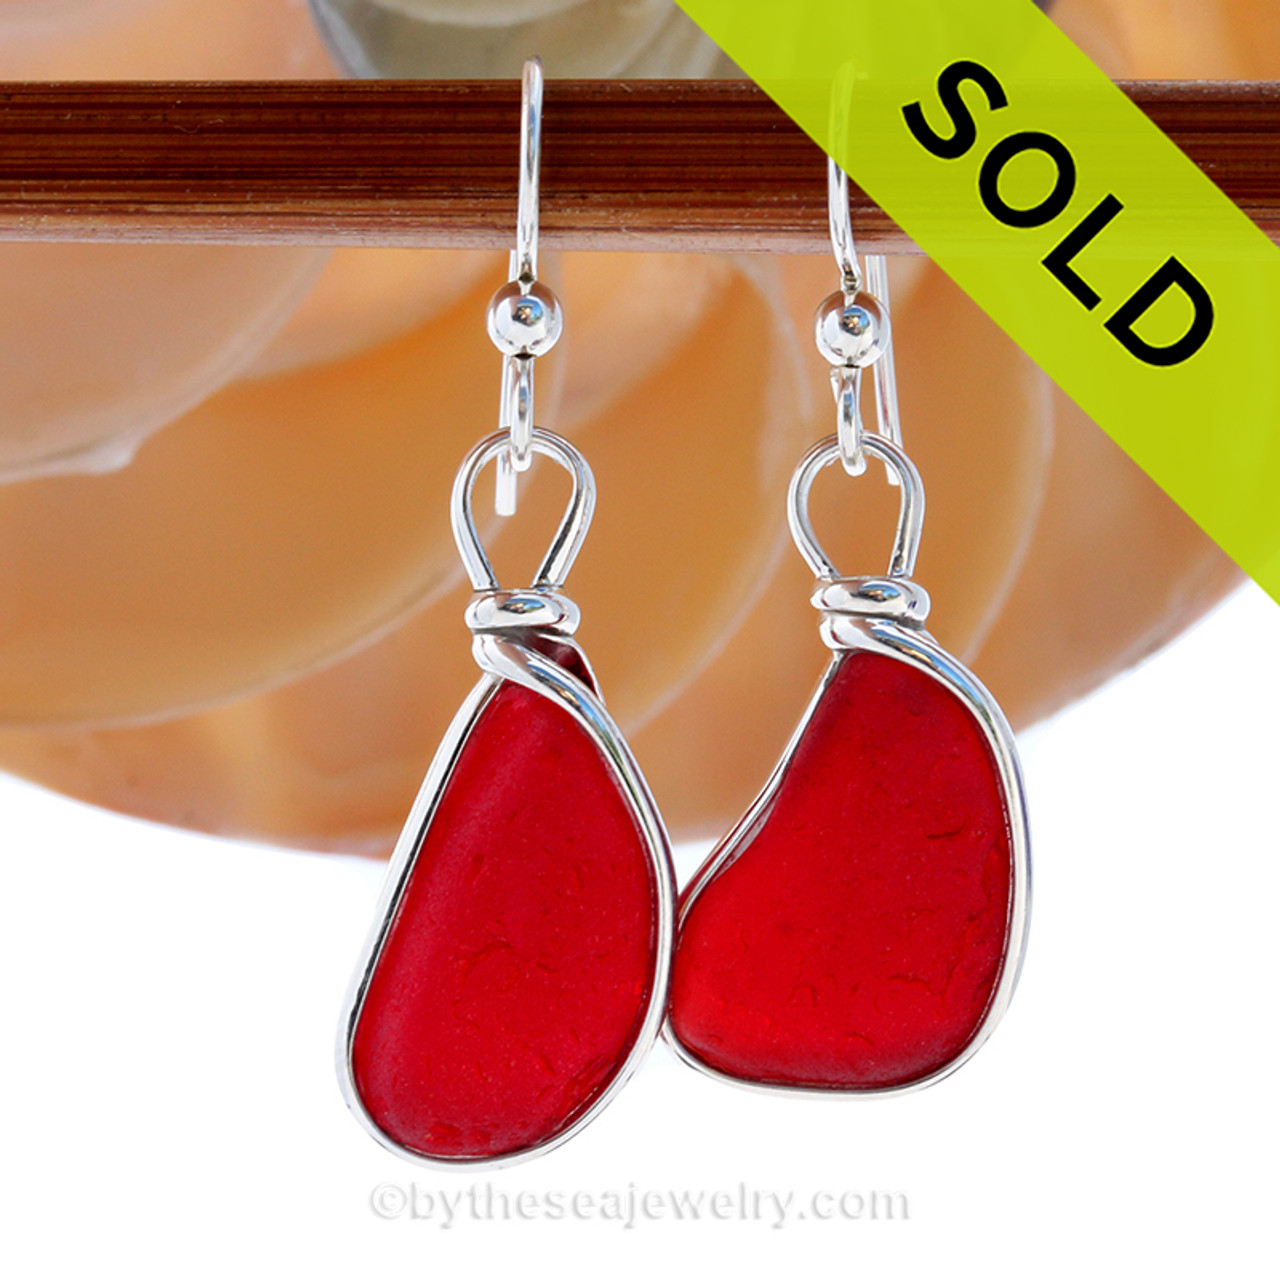 Amazon.com: Red Sea Glass Earrings, Beach Glass Earrings, Puka Shell  Earrings, Cherry Red Glass Drop Earrings, Sterling Silver. : Handmade  Products